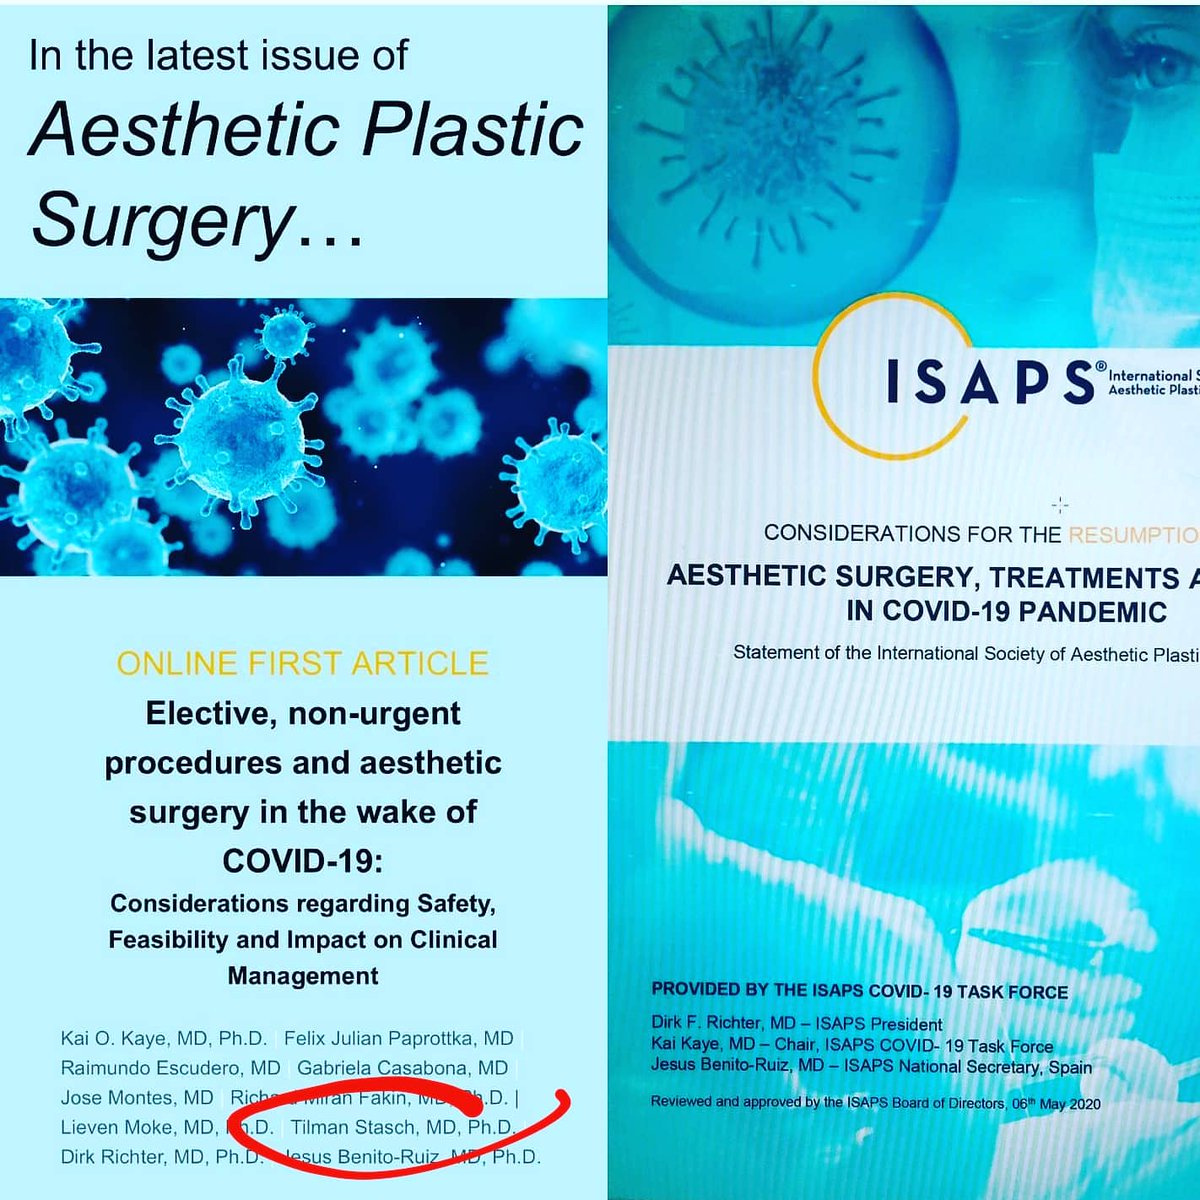 Proud to be part of a team of international experts authoring a fundamental article on the safe return to surgical ops after the COVID-19 pandemic. 
#ISAPS #AestheticPlasticSurgeryJournal
#COVID19 #coronaviruskenya #globalstrategies #guideline